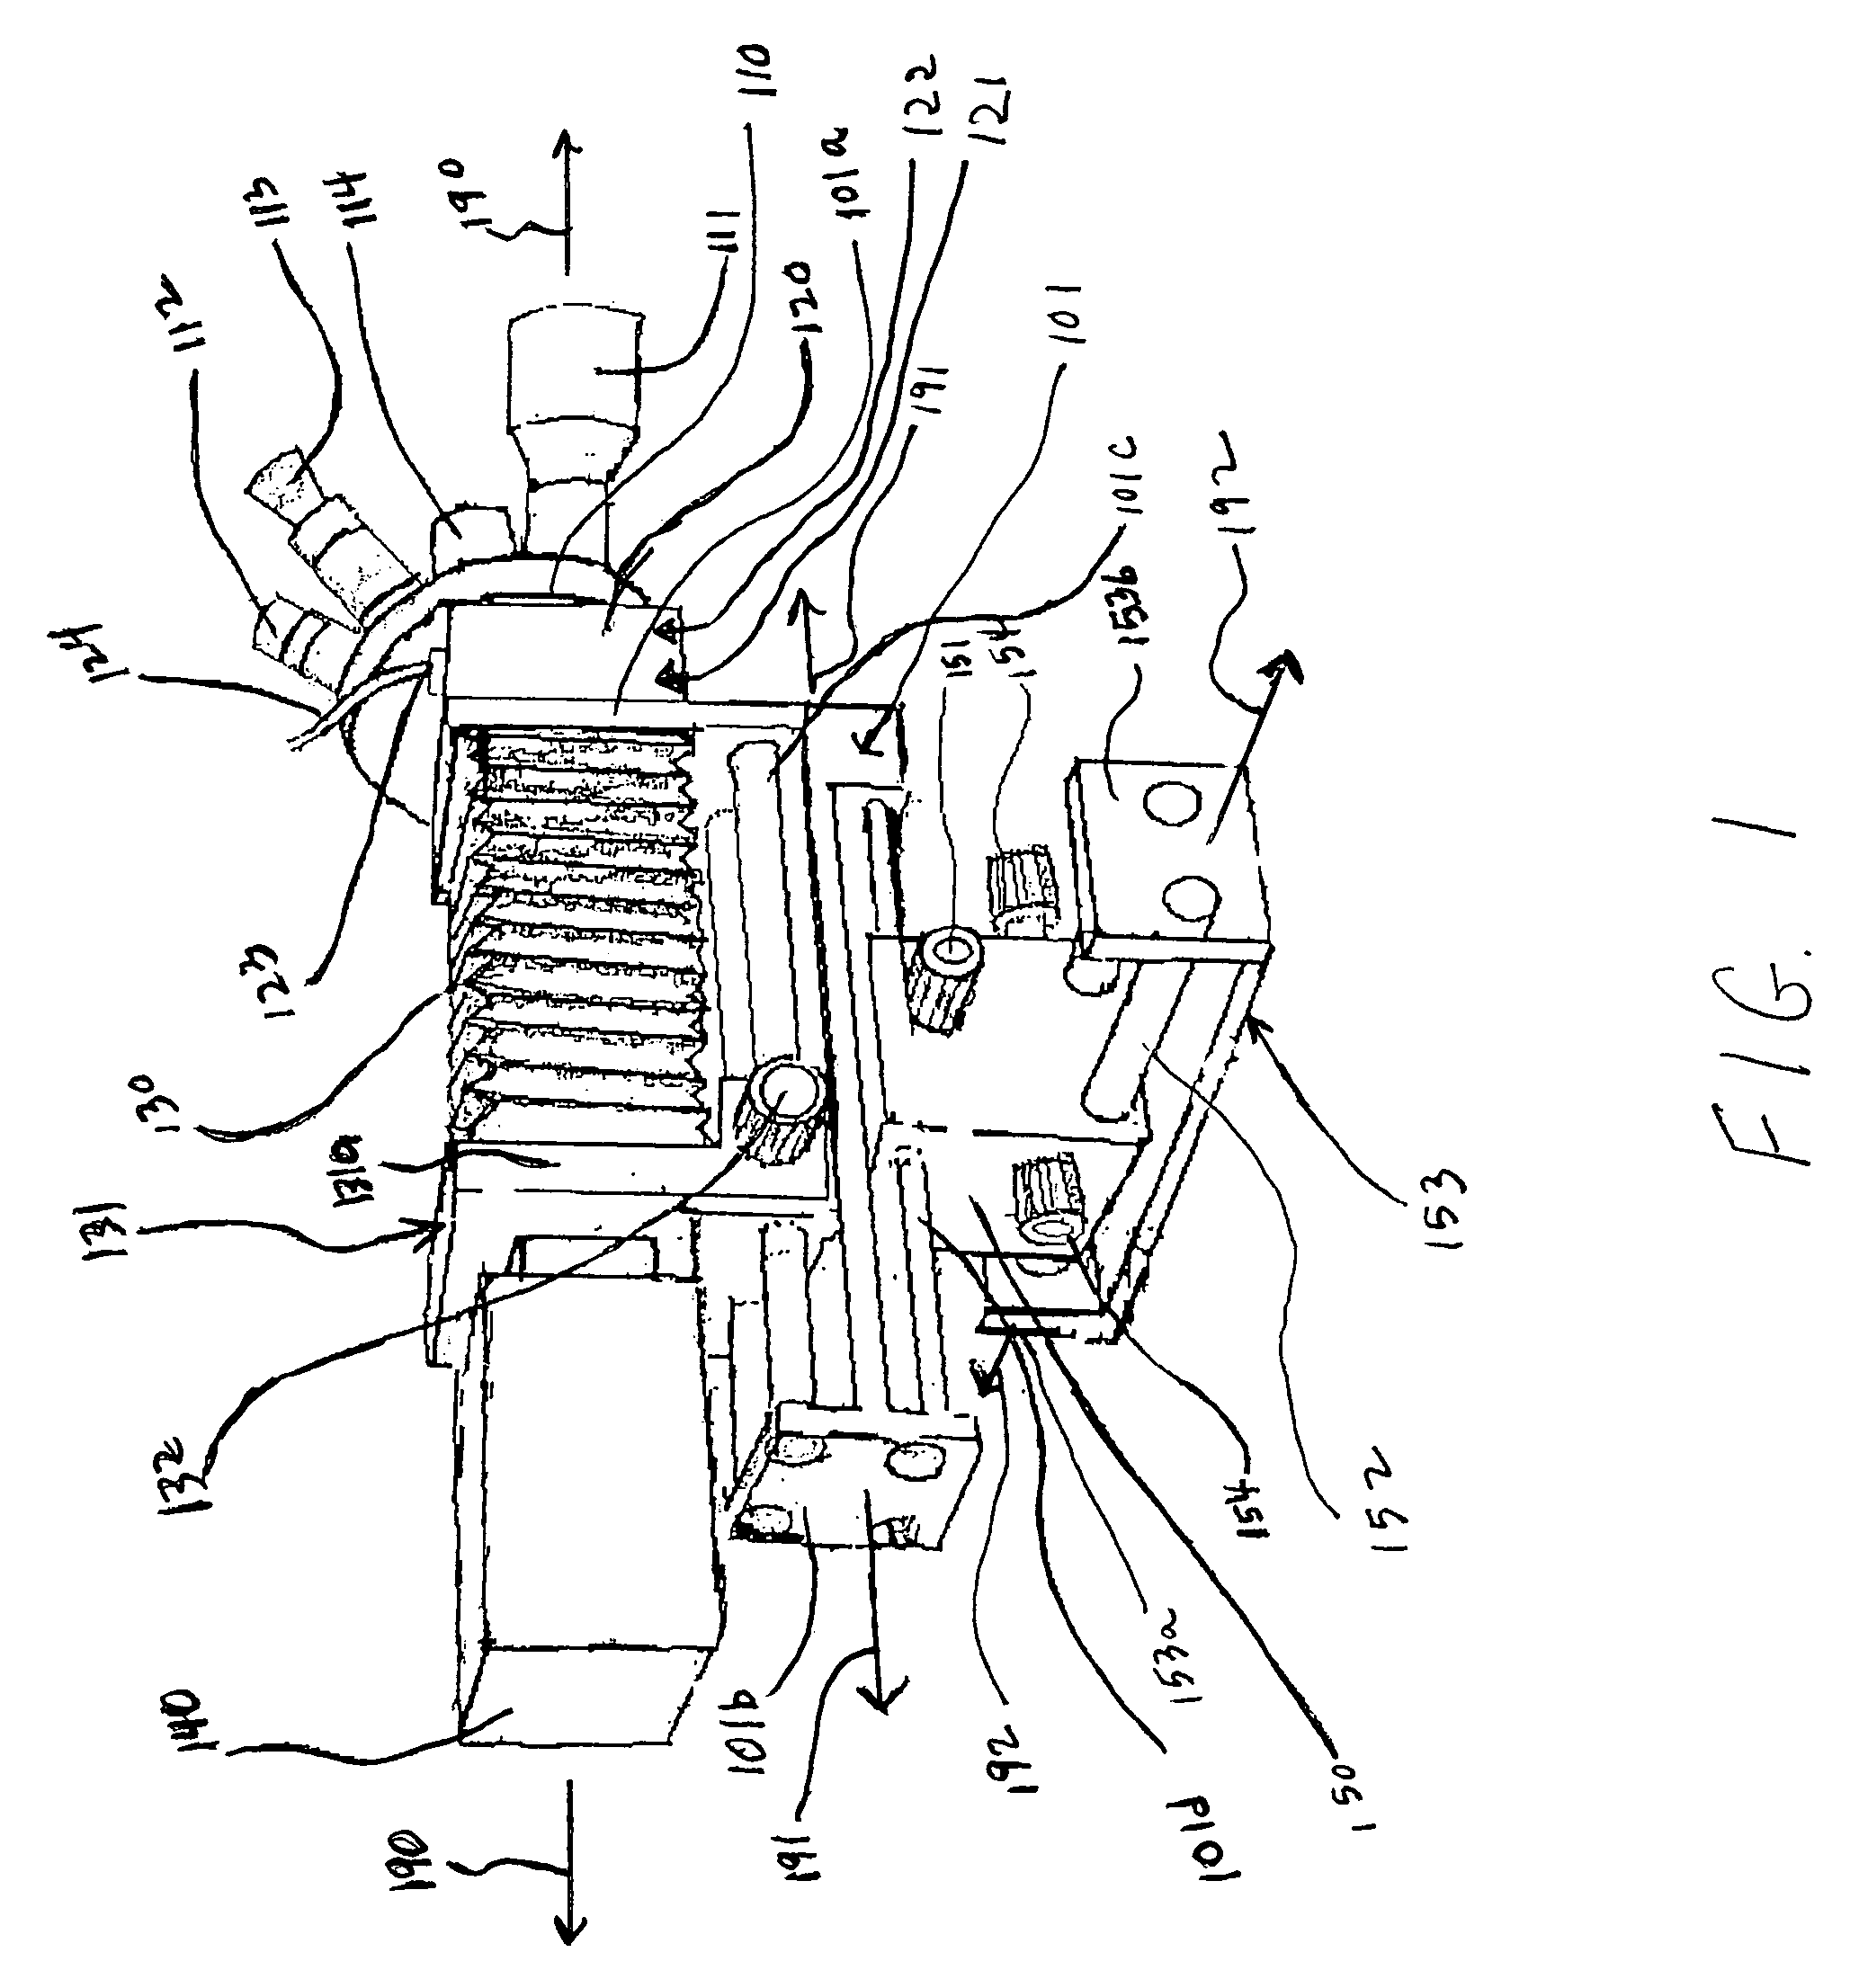 Microscope with objective lens position control apparatus